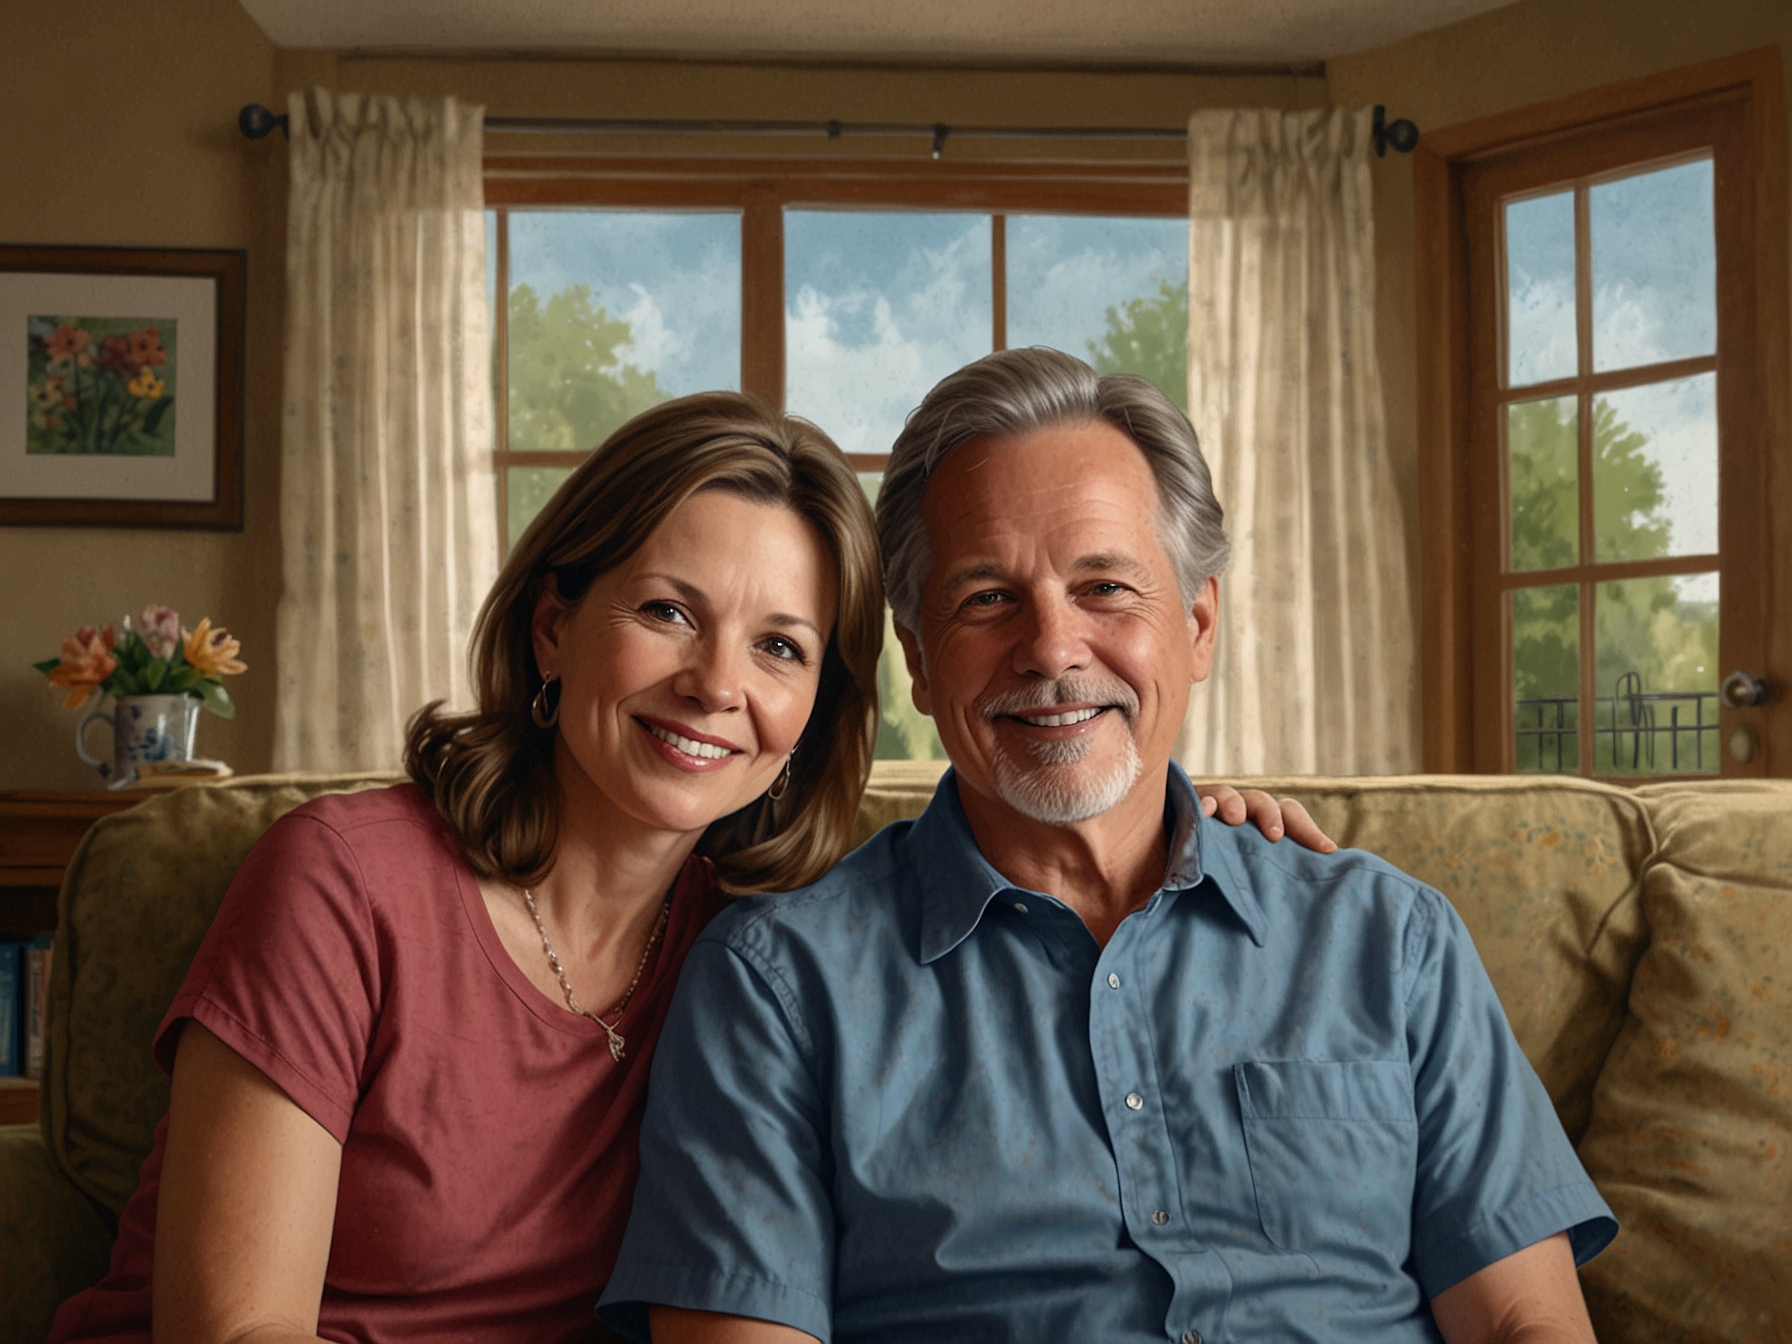 Cathy and Todd Fisher sit together at their home, sharing their story of resilience and miraculous recovery from the neuroinvasive West Nile virus to inspire others.